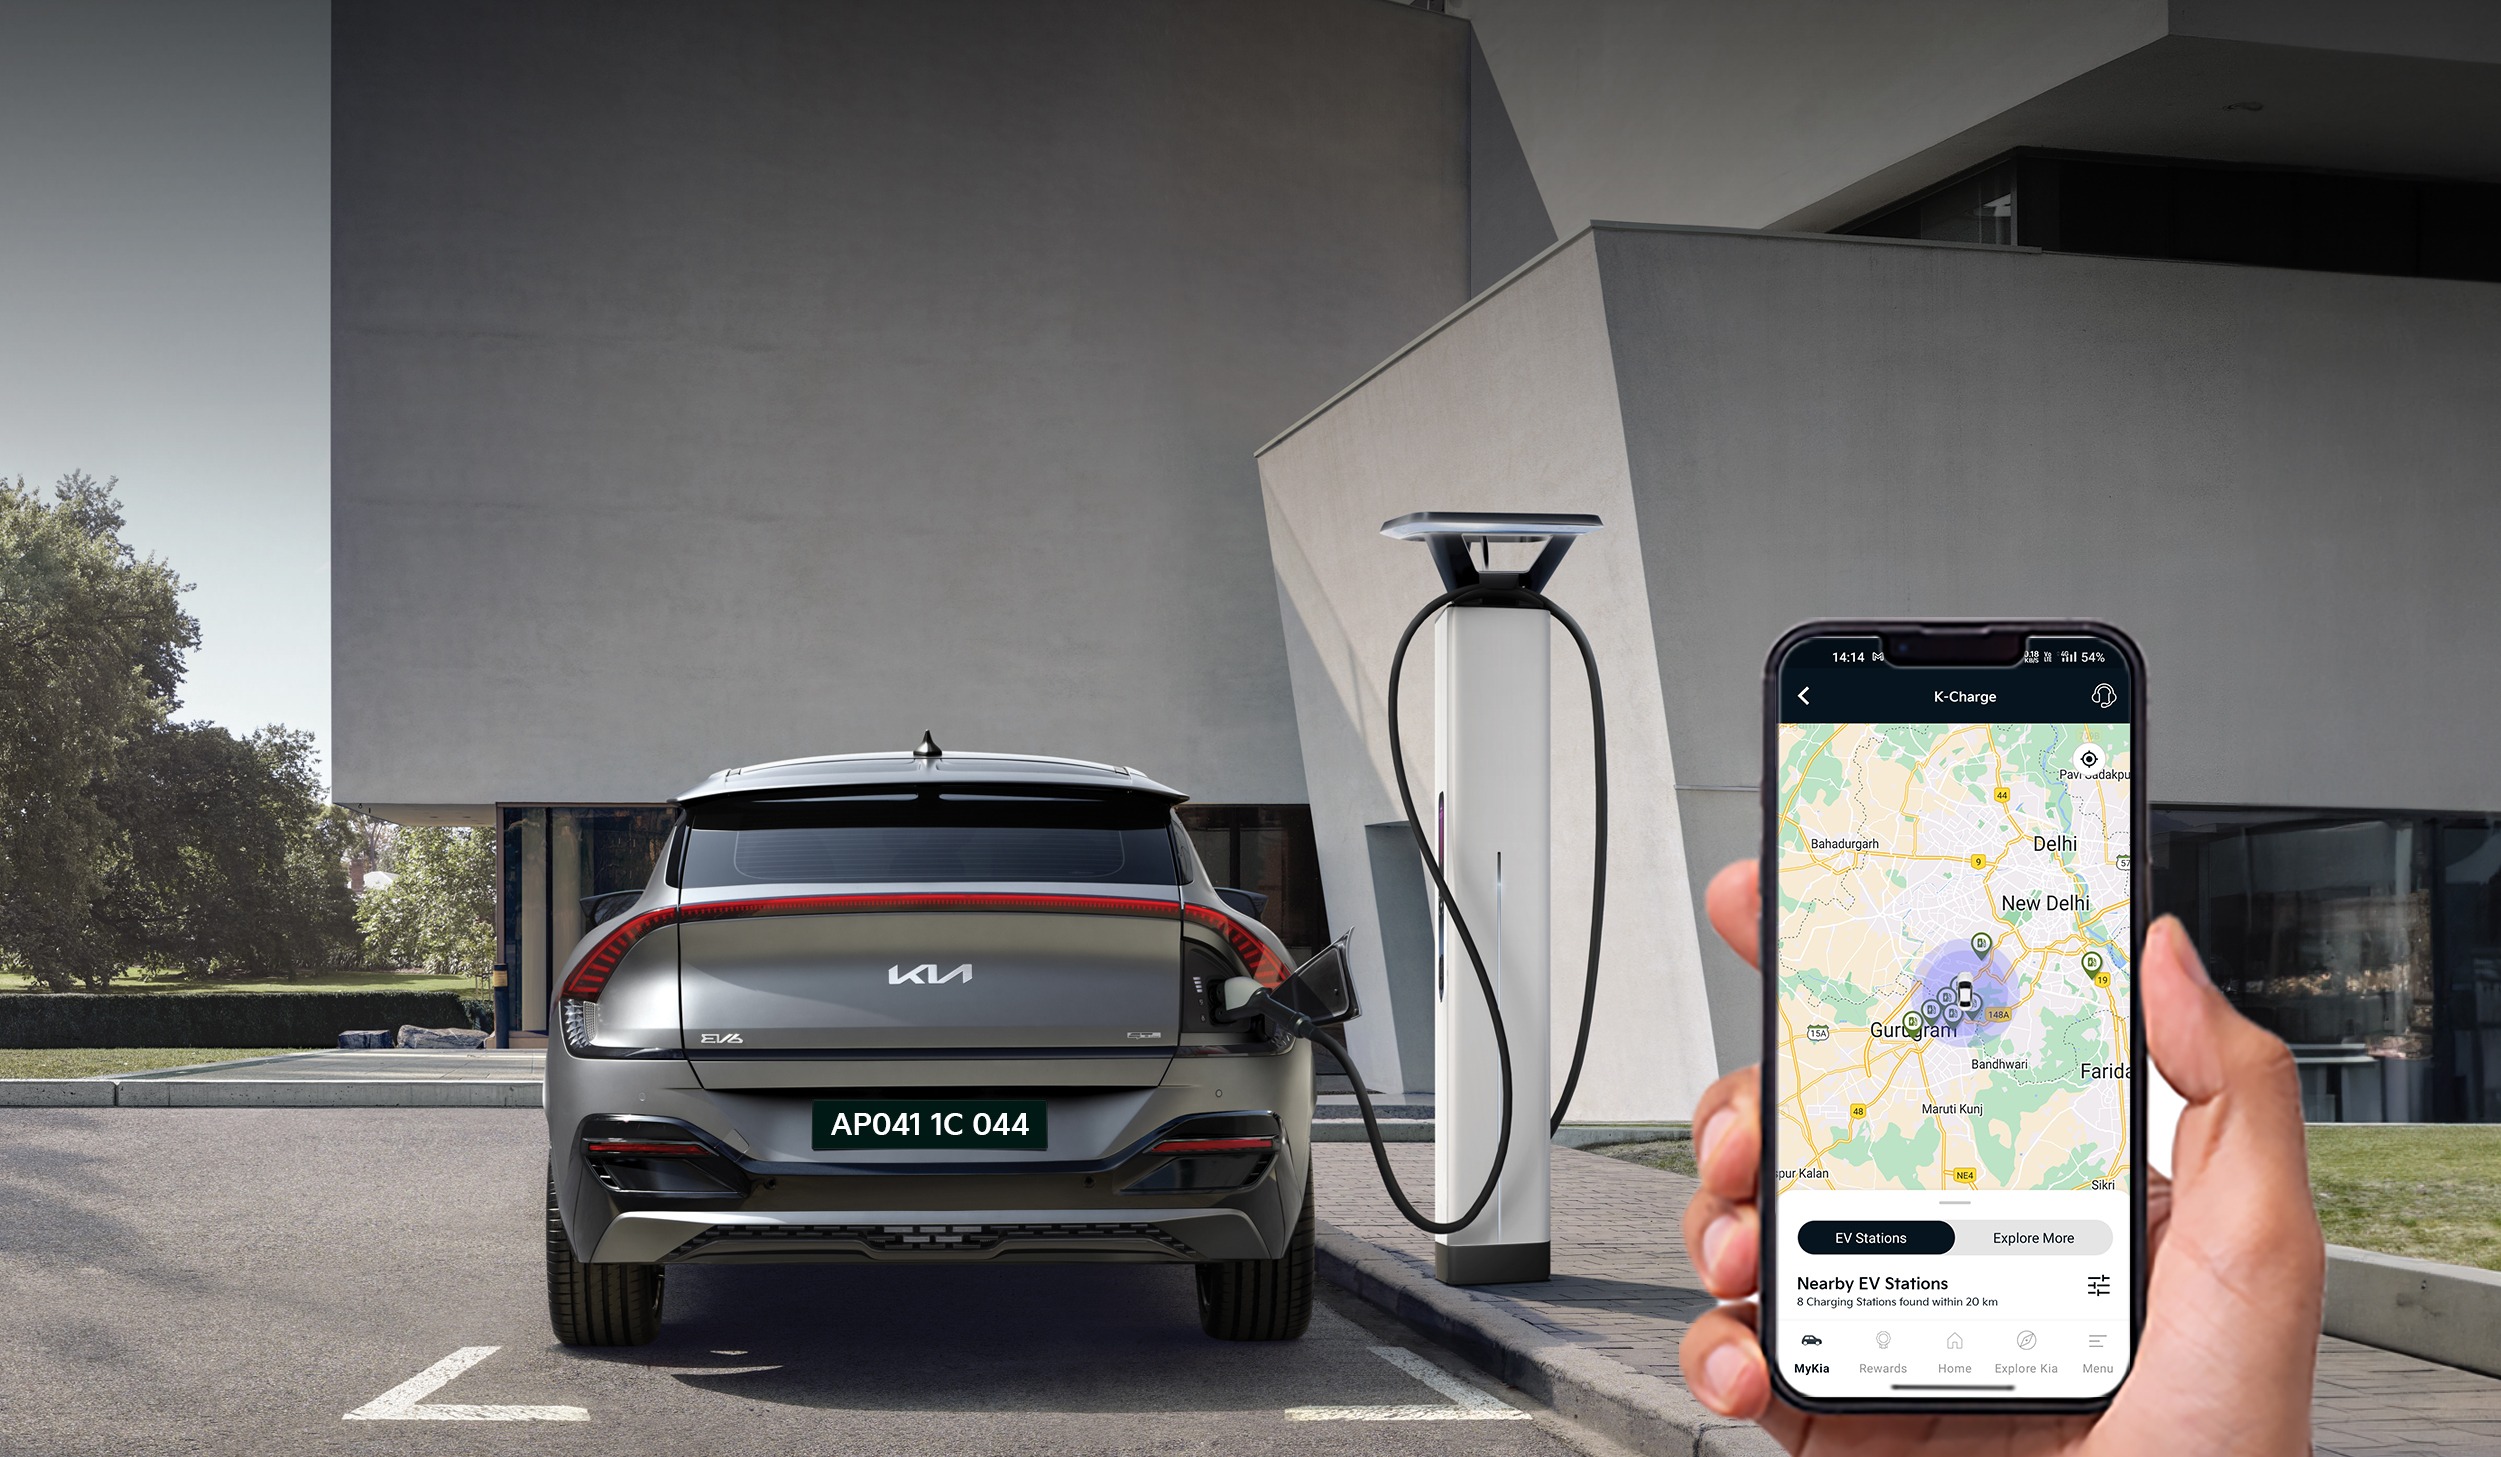 Kia Revolutionizes Electric Vehicle Charging Landscape with K-Charge Initiative in India